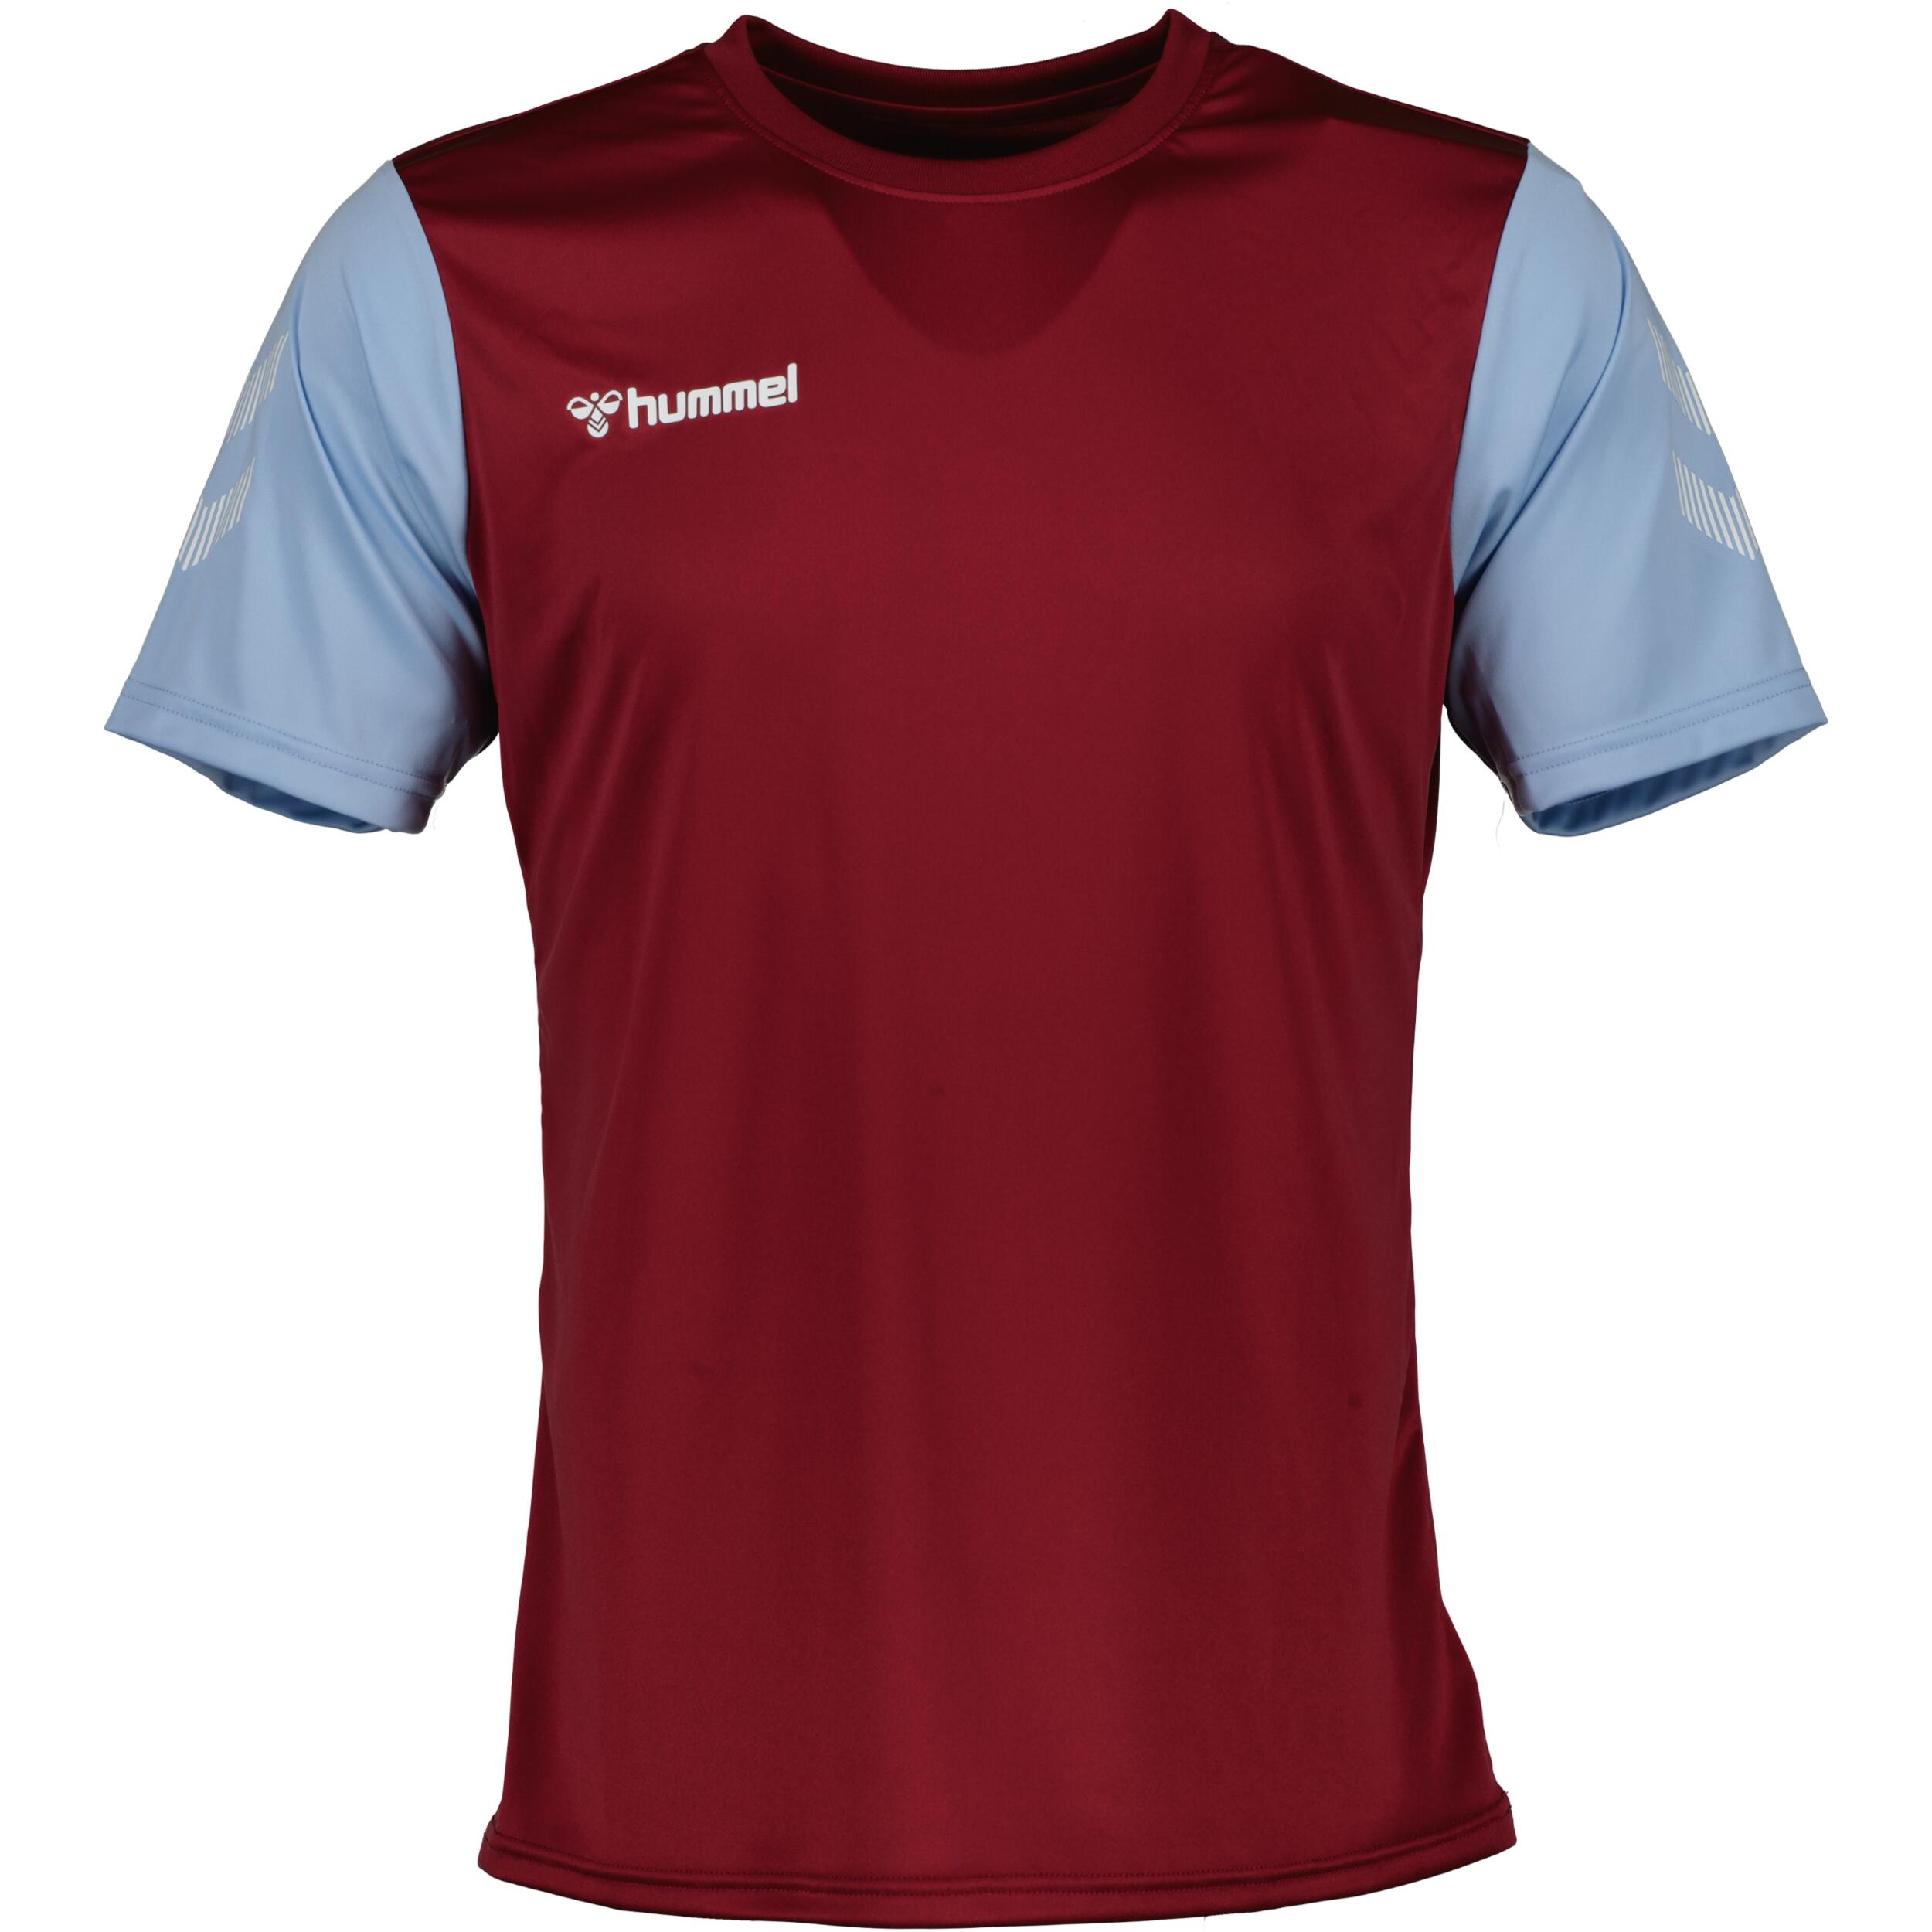 HUMMEL Match jersey for men, great for football, in maroon/argentina blue